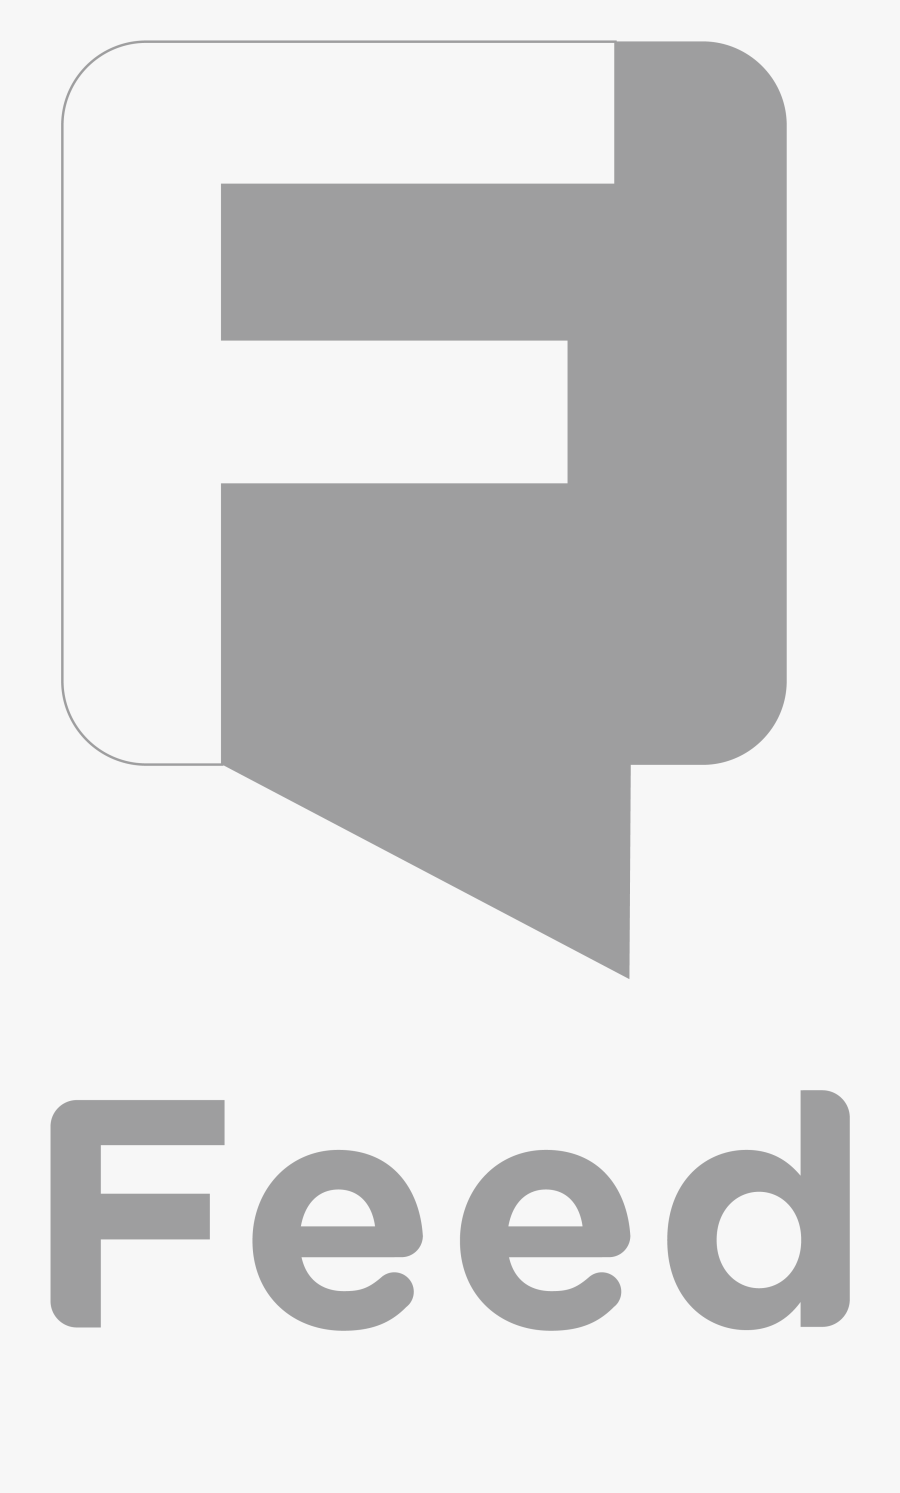 Feed Logo Gray - Graphics, Transparent Clipart